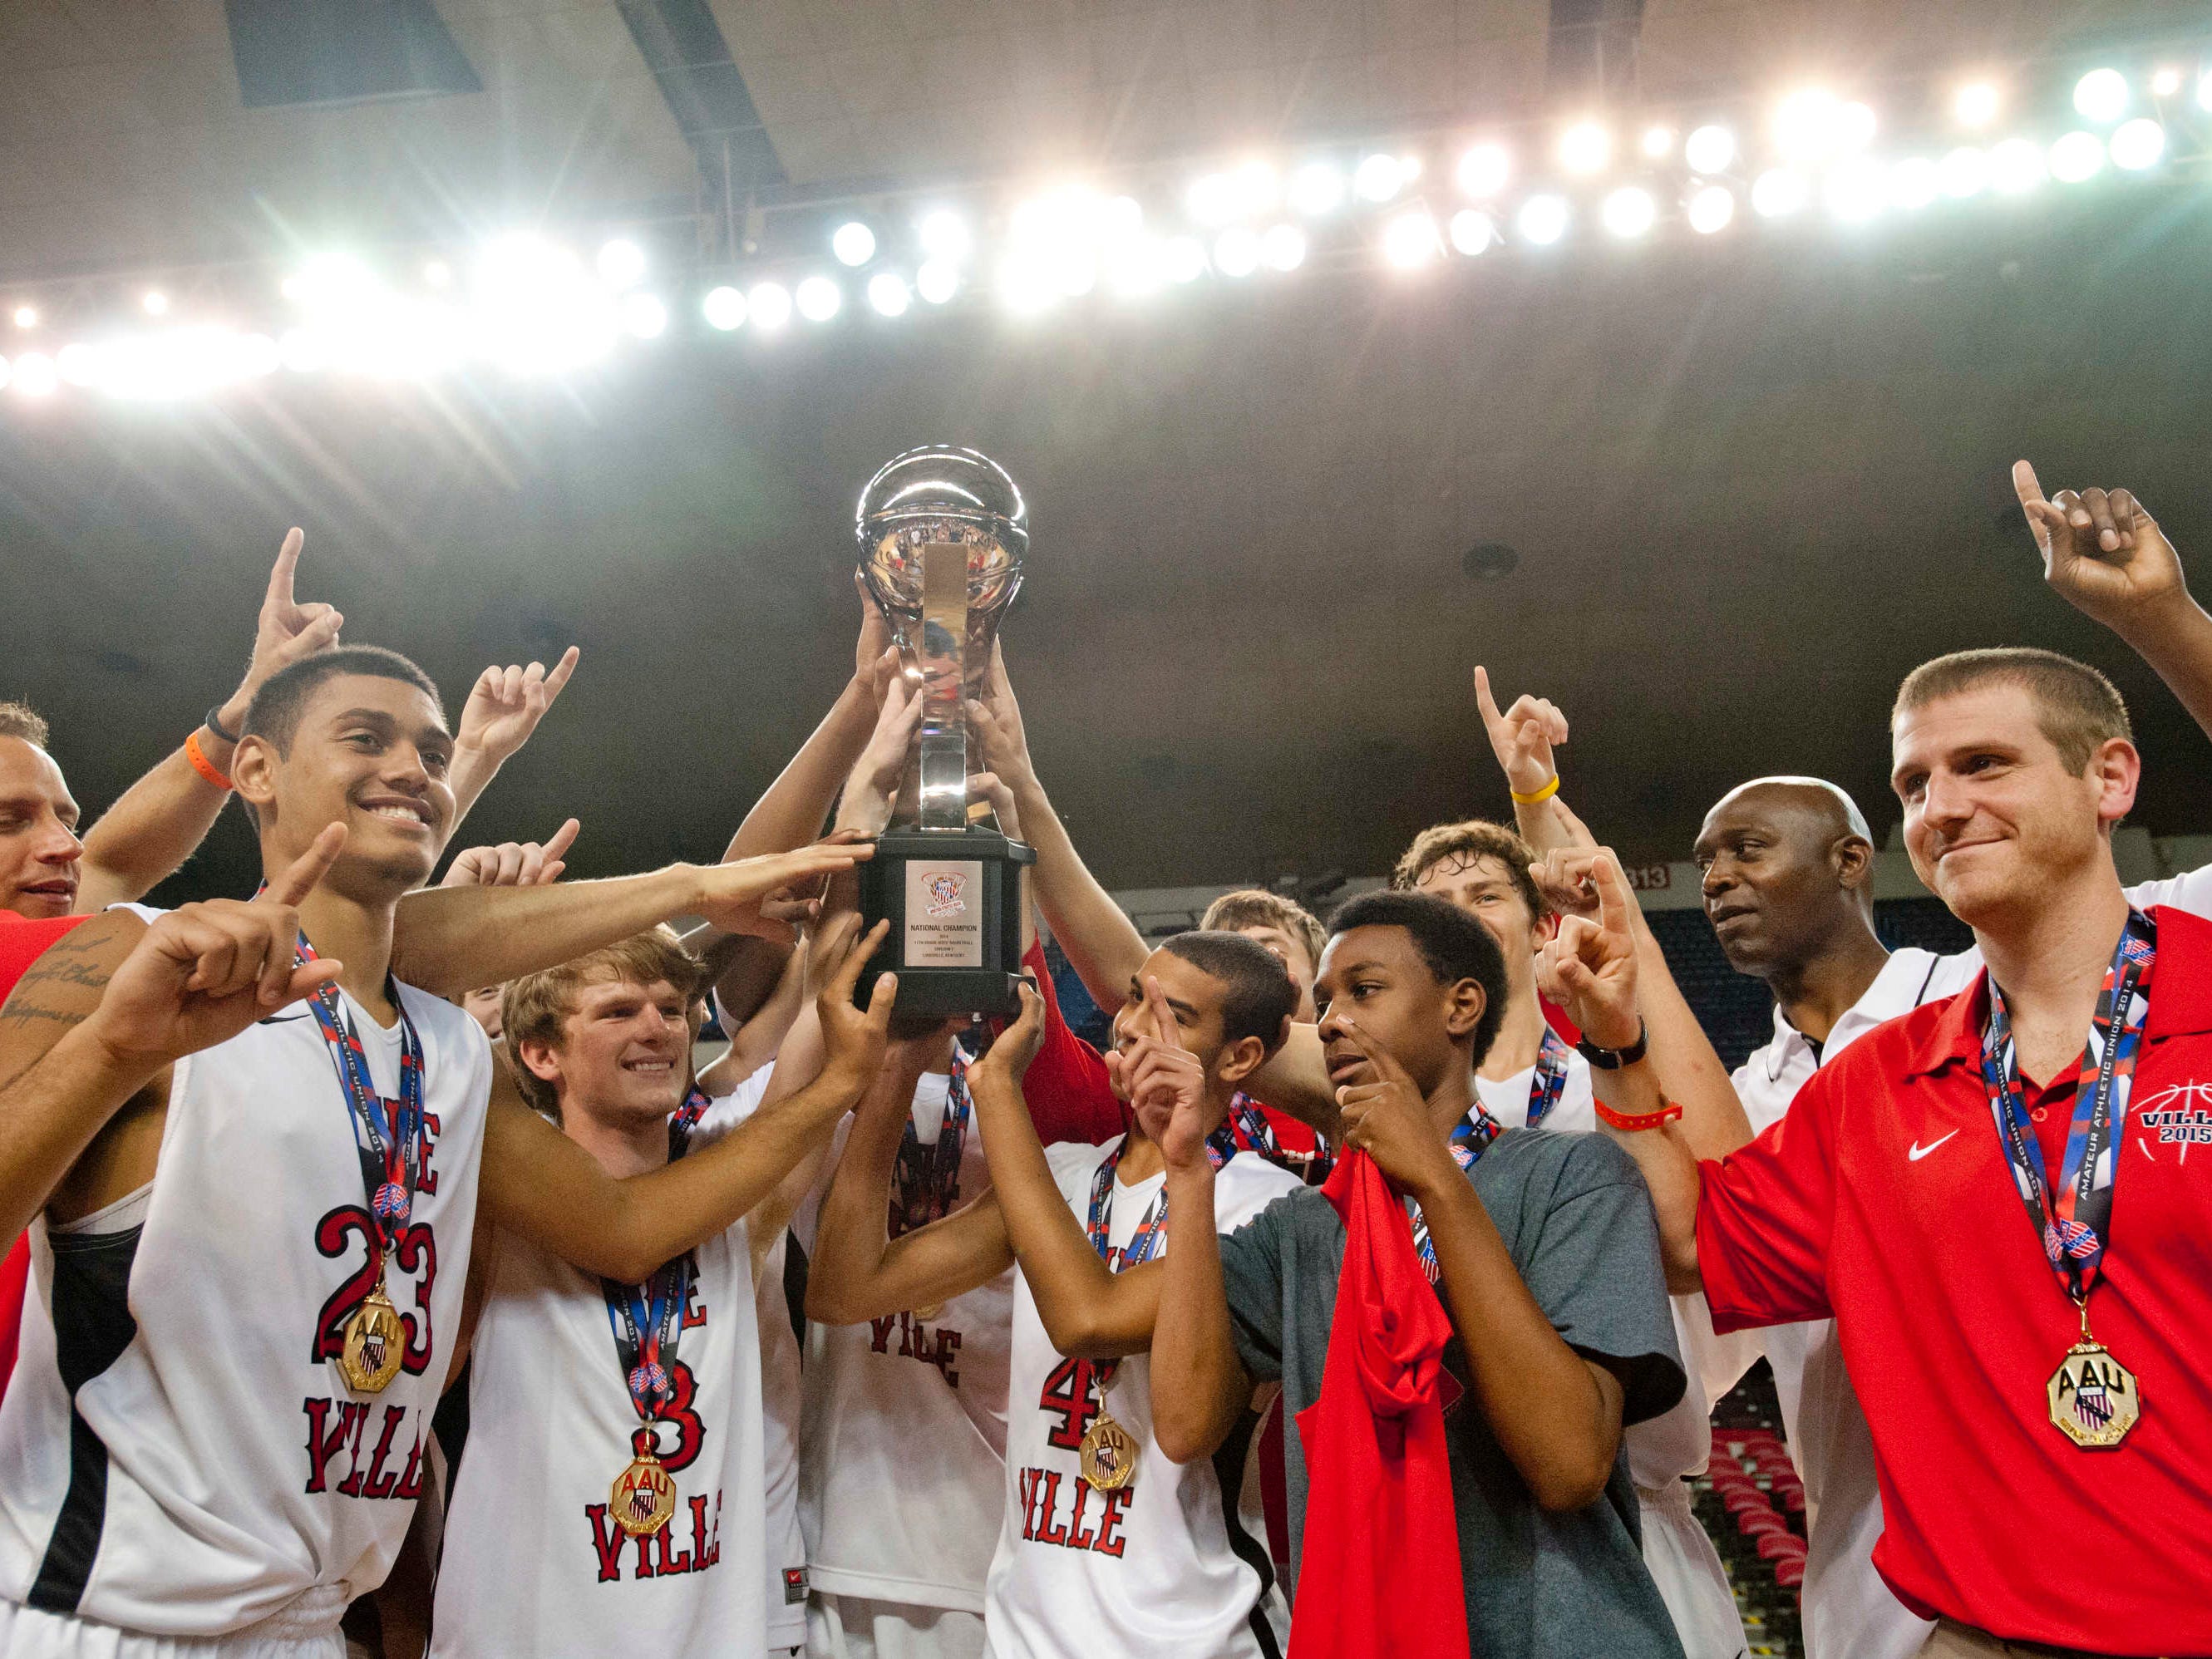 The Ville celebrates its 11th-grade AAU national championship in Freedom Hall on Monday night. Trinity High big man Raymond Spalding scored 15 points in The Ville’s 46-40 victory over the Albany (N.Y.) City Rocks.